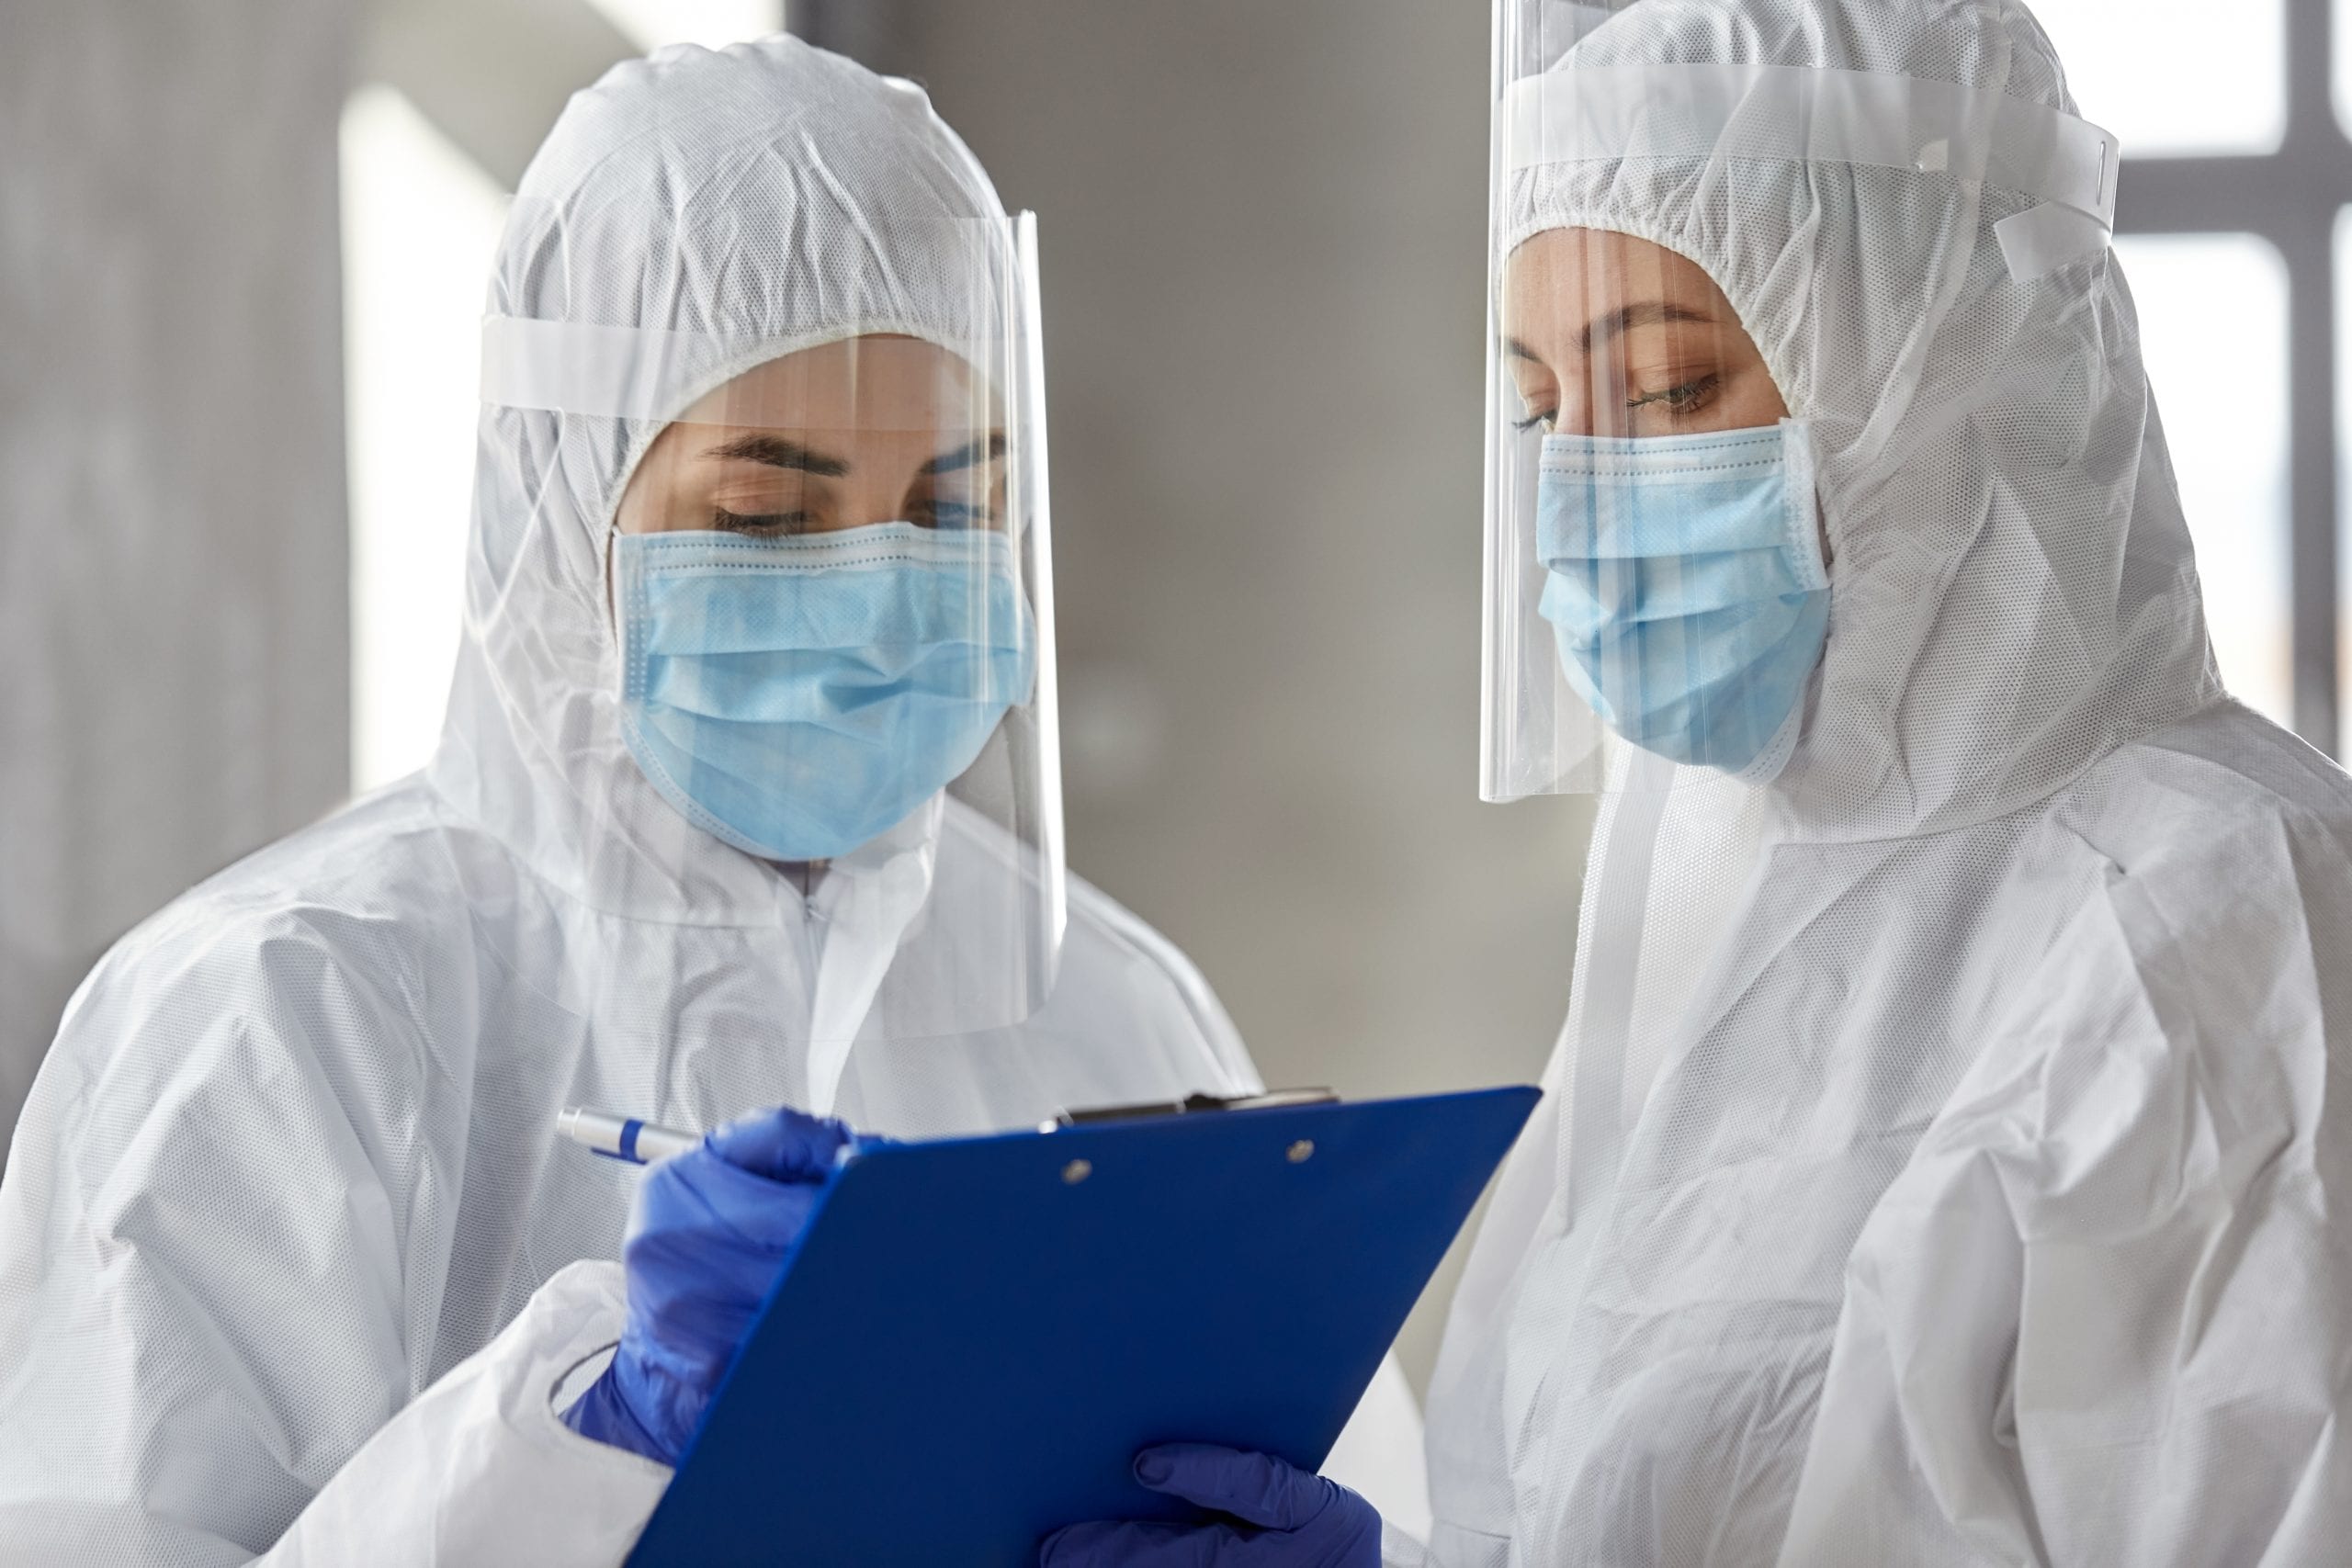 health safety, medicine and pandemic concept - female doctors or scientists in protective wear, medical masks, gloves and face shields for protection from virus disease with clipboard